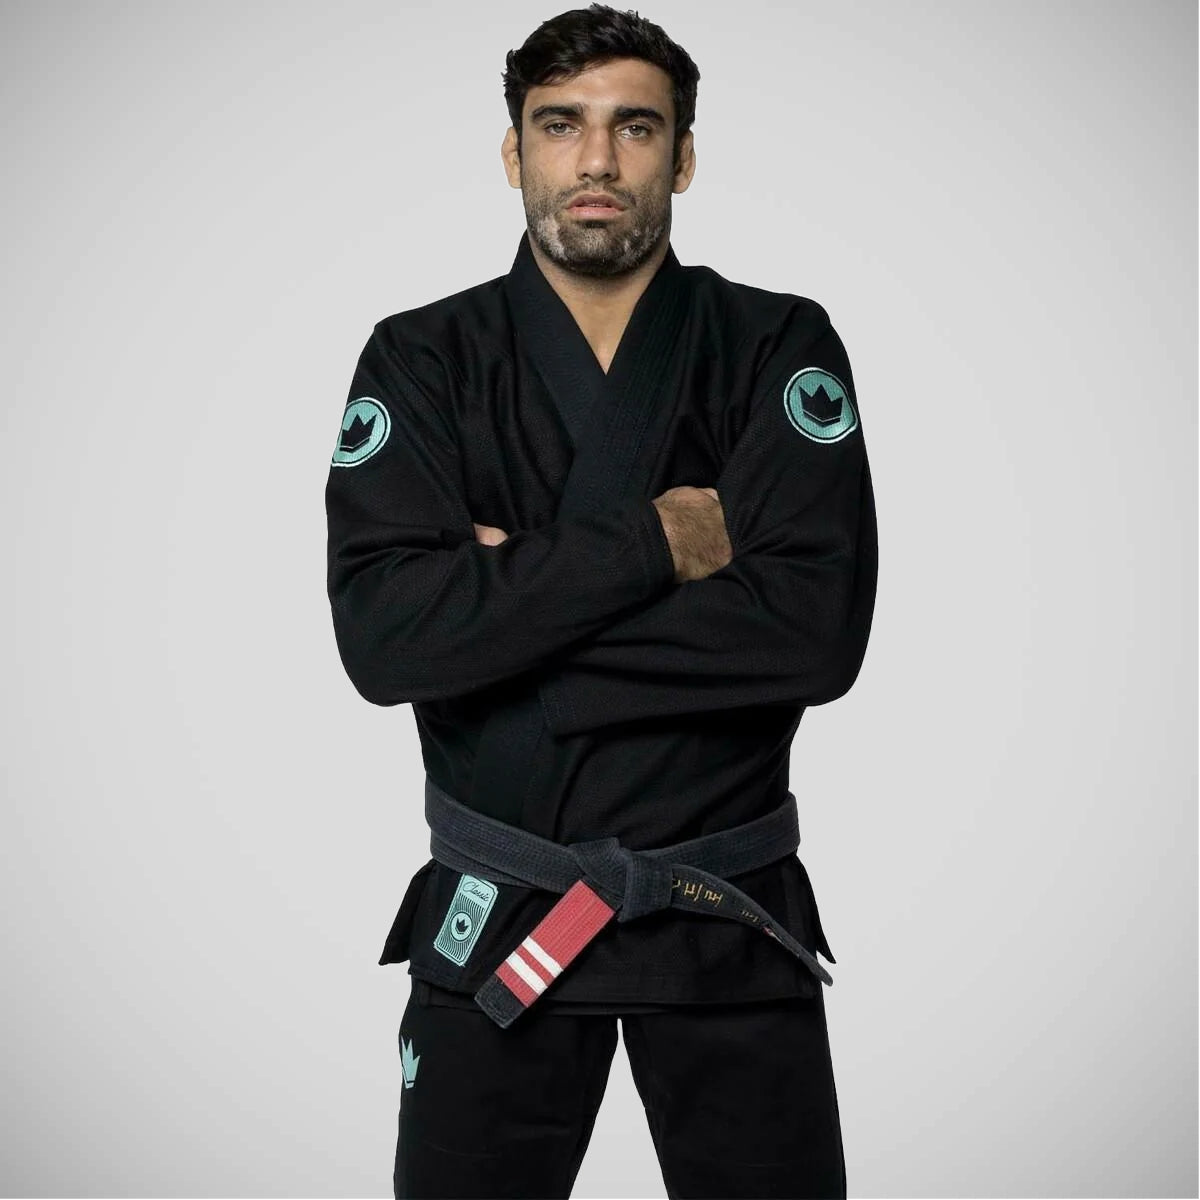 Black Kingz Classic 3.0 BJJ Gi from Made4Fighters